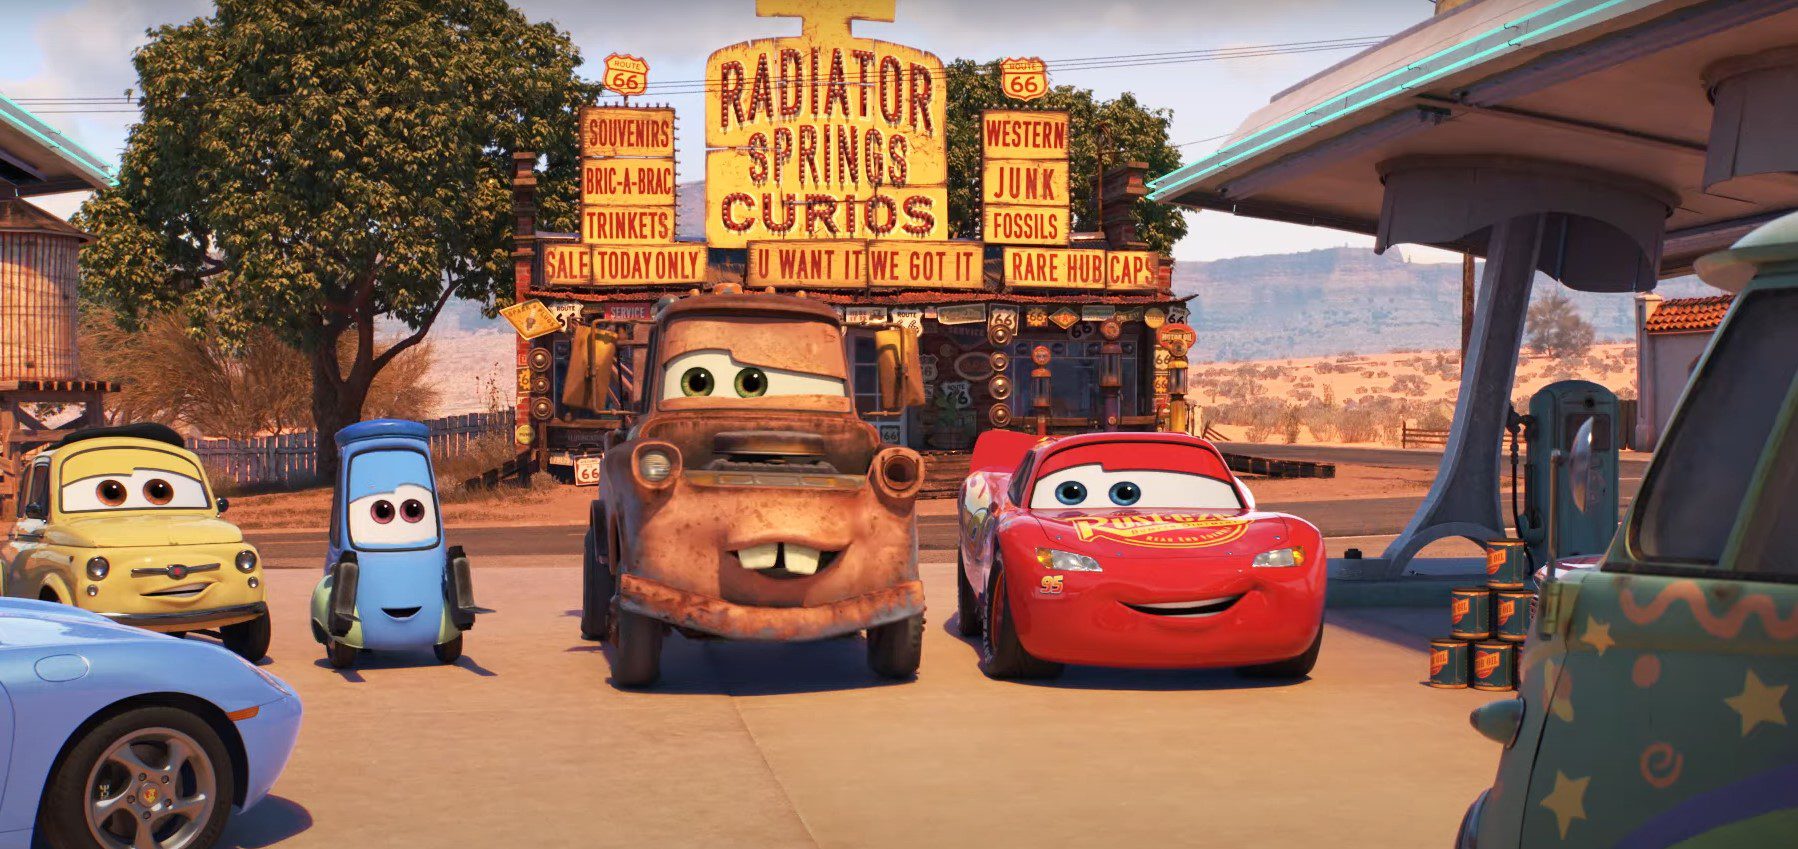 Cars On The Road Release Date